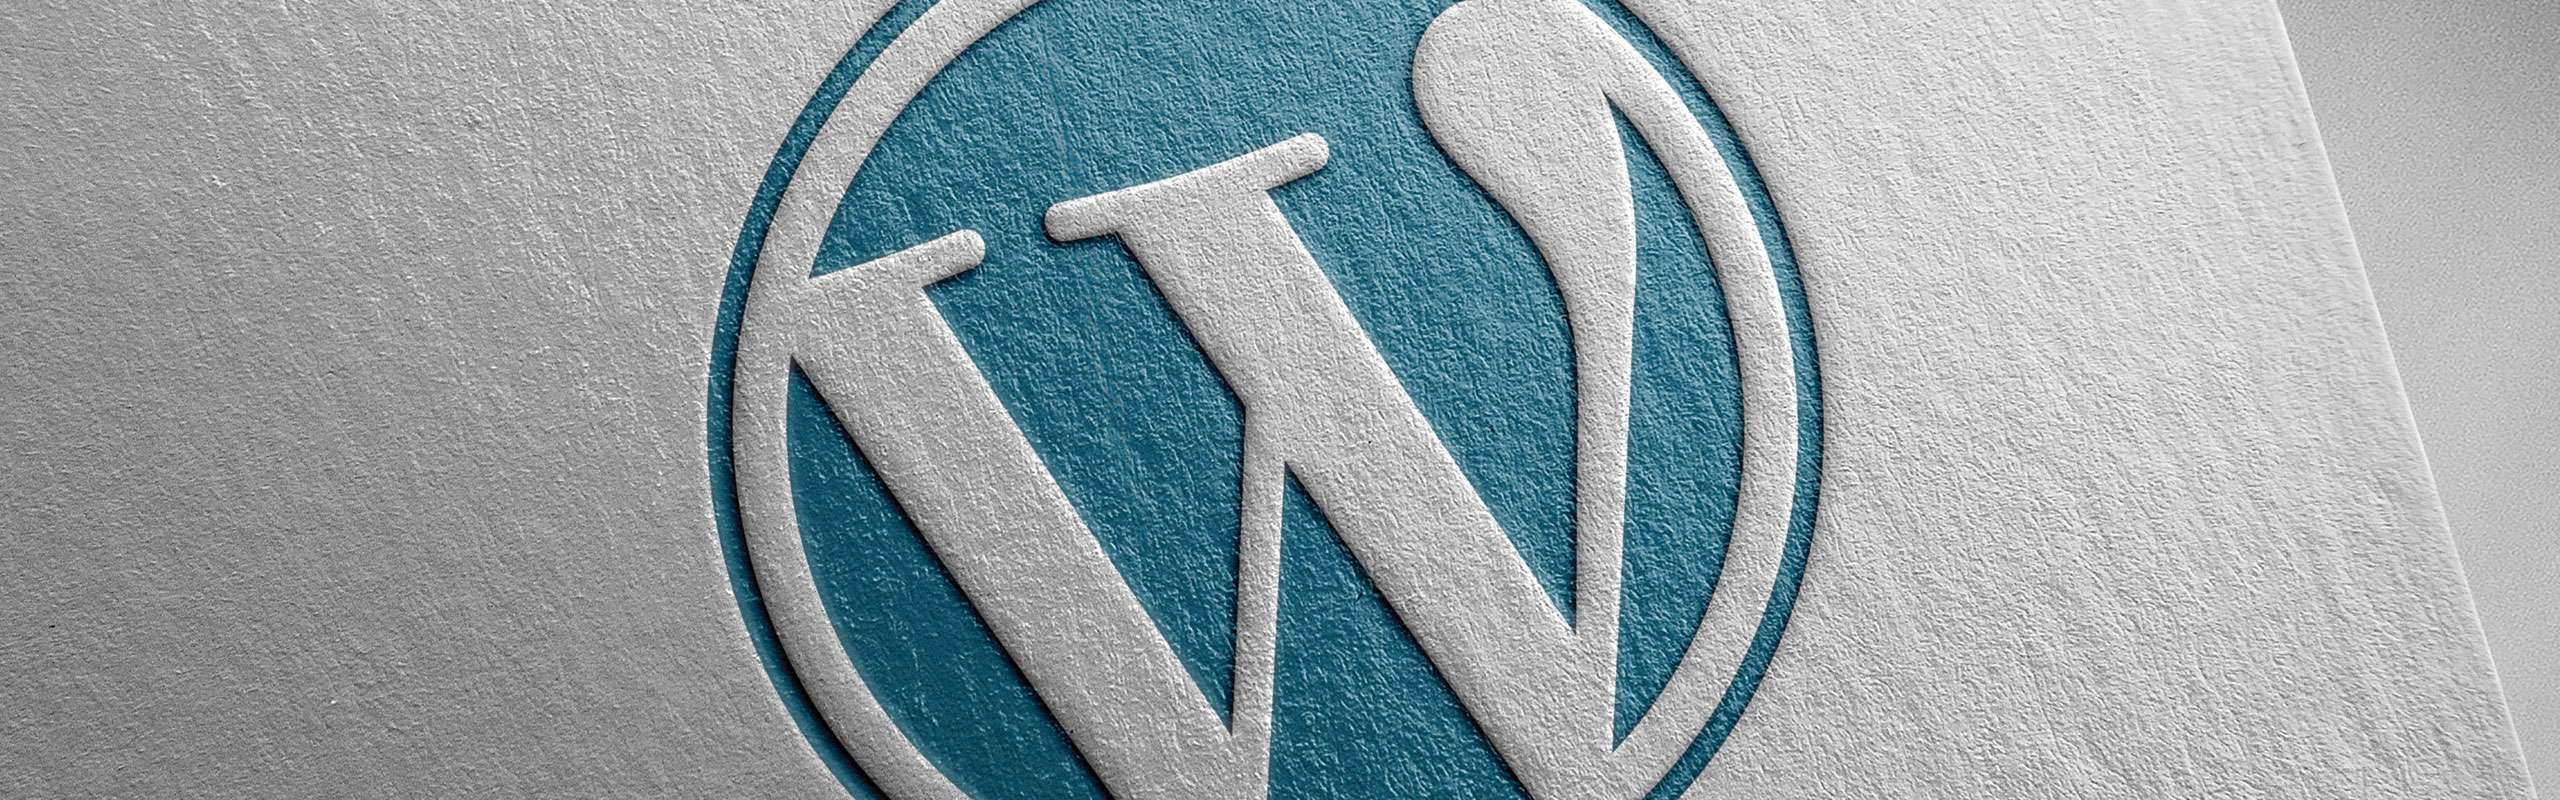 Take Control of Your Website Again with WordPress Migration